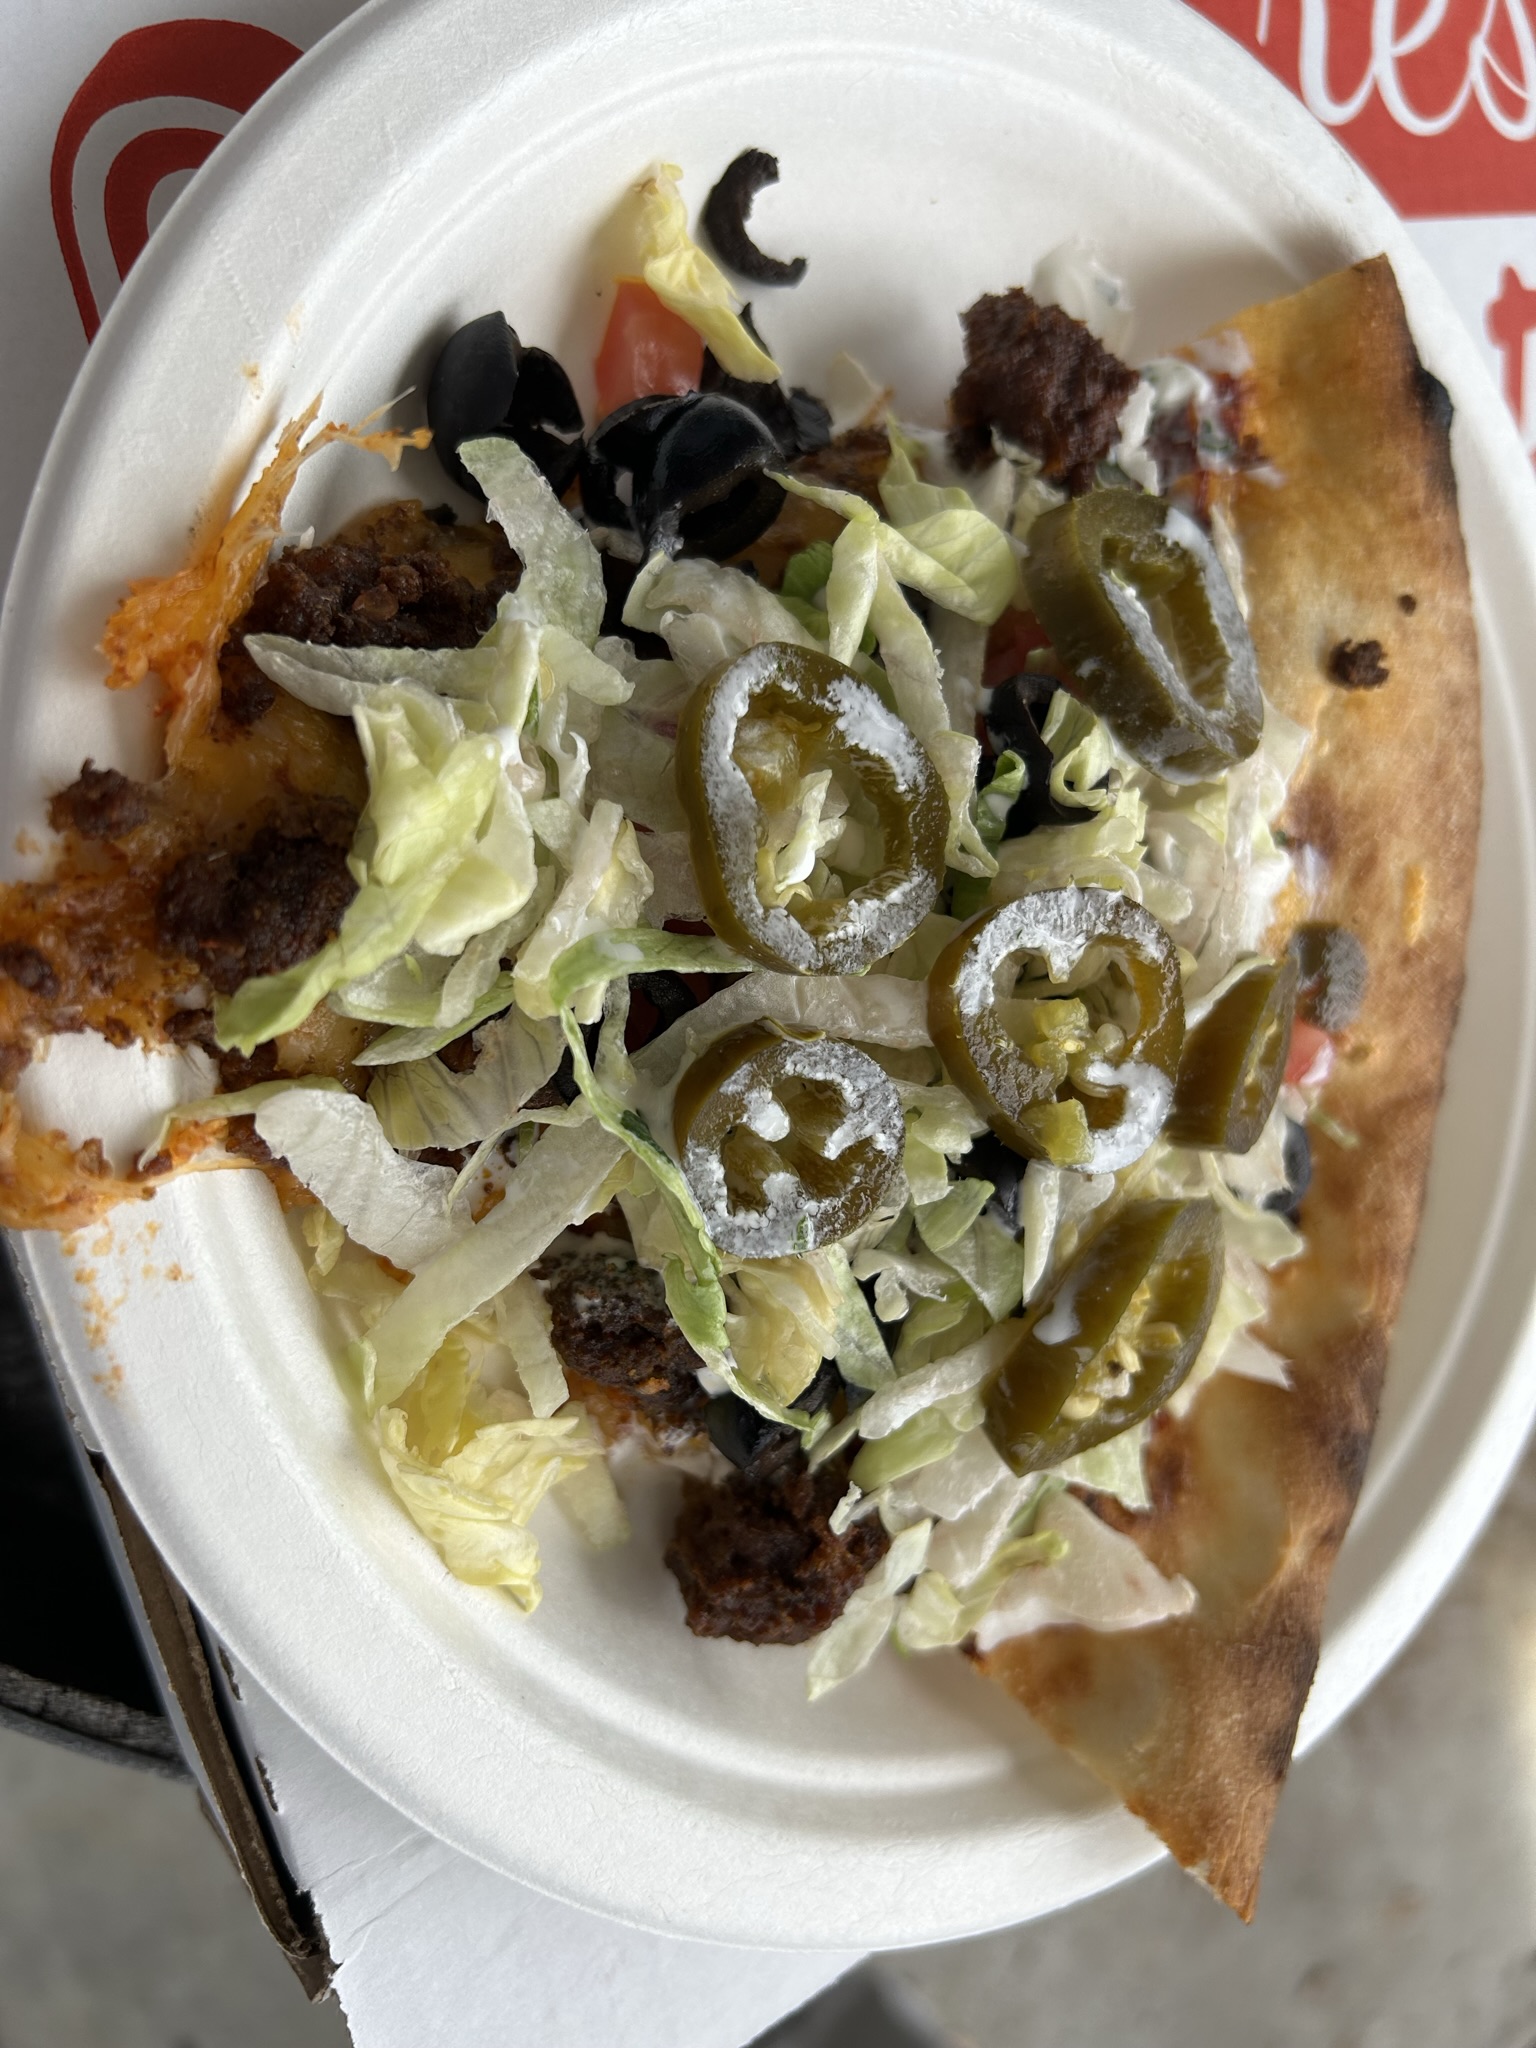 Taco pizza in the 503